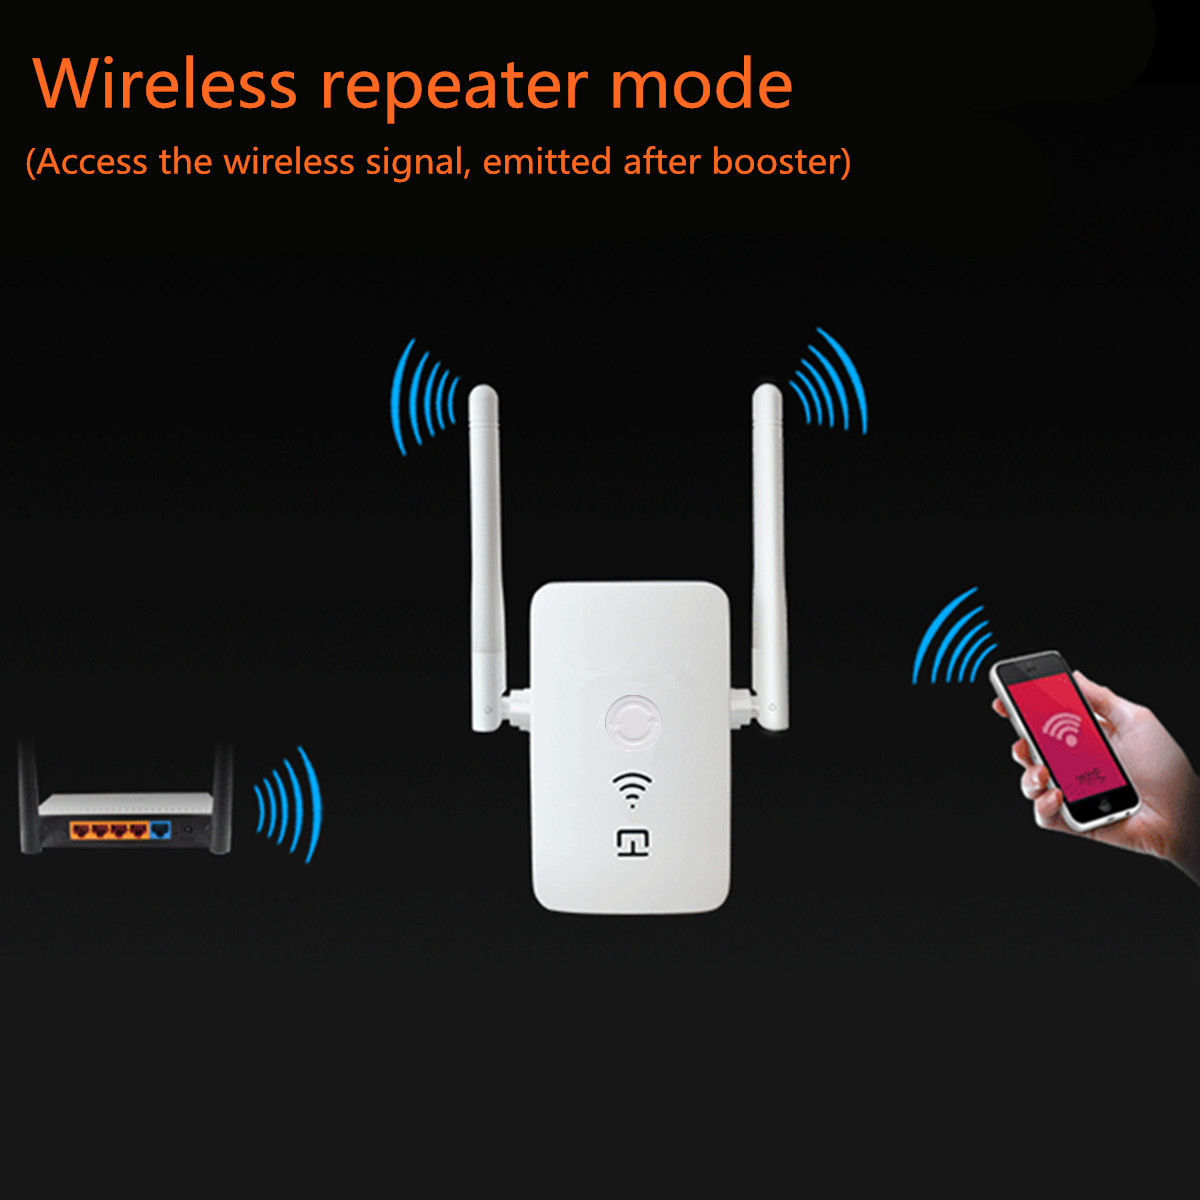 150Mbps-Wireless-WiFi-Range-Extender-Signal-Booster-Router-Repeater-Dual-Antenna-with-LAN-USB-Port-1119784-5